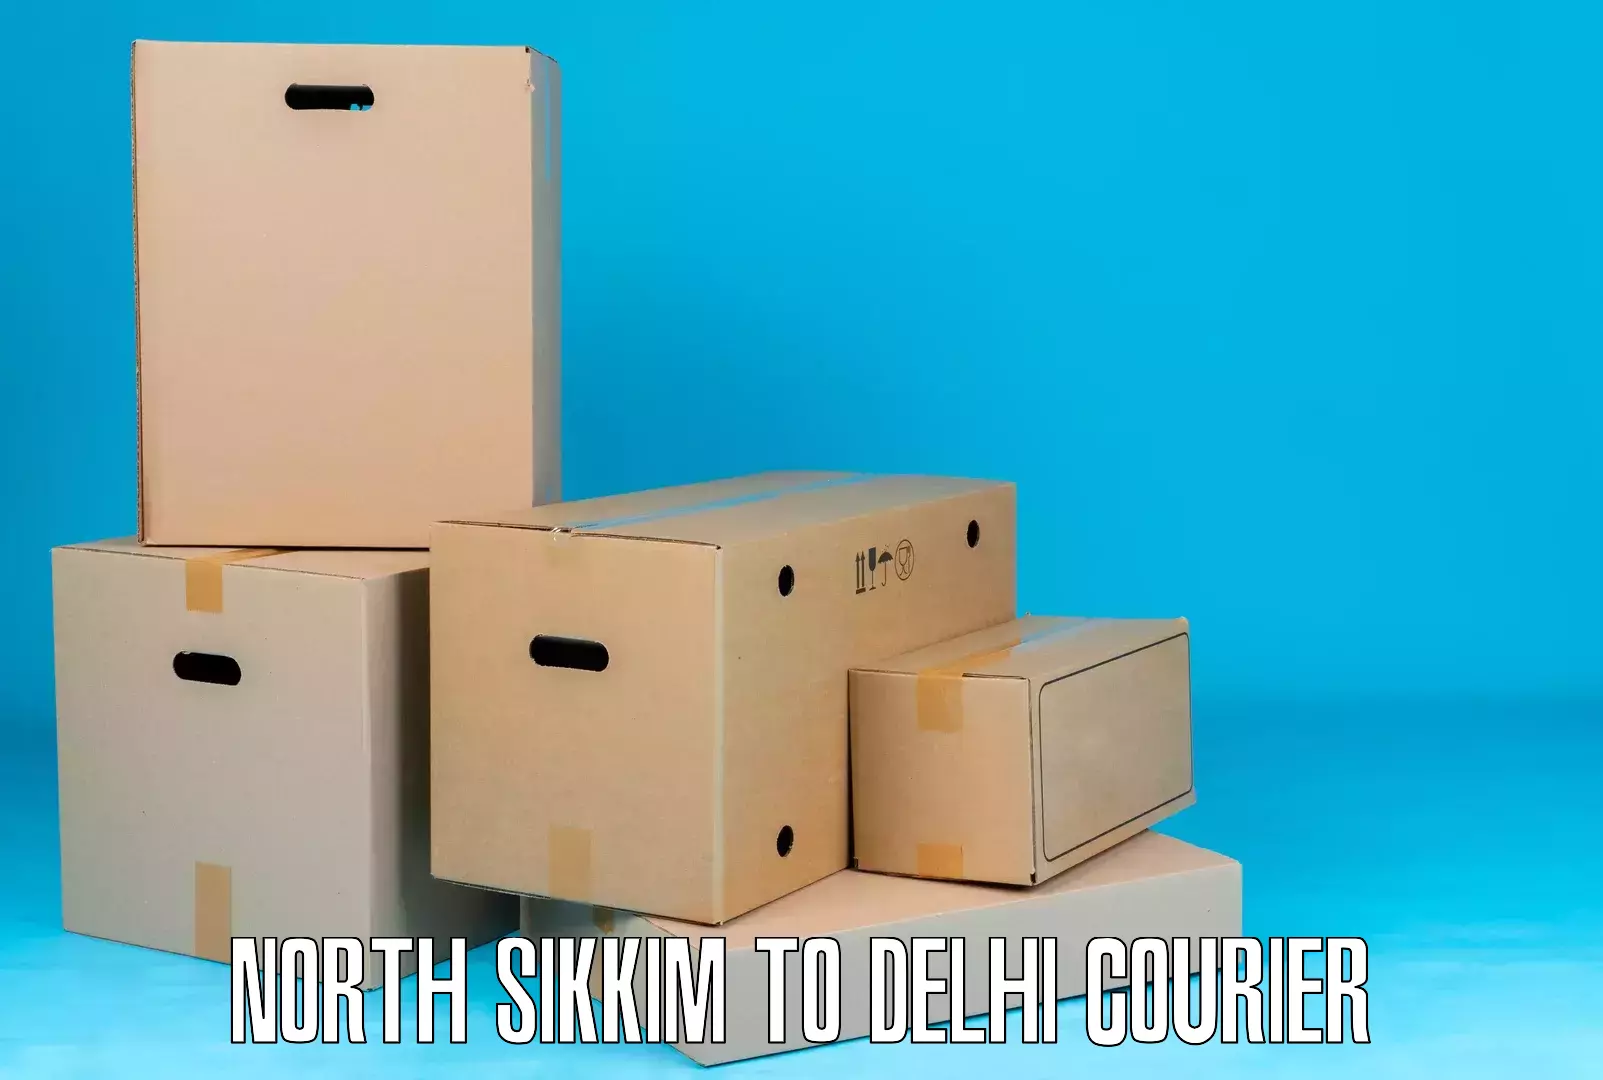 24-hour courier service in North Sikkim to Kalkaji